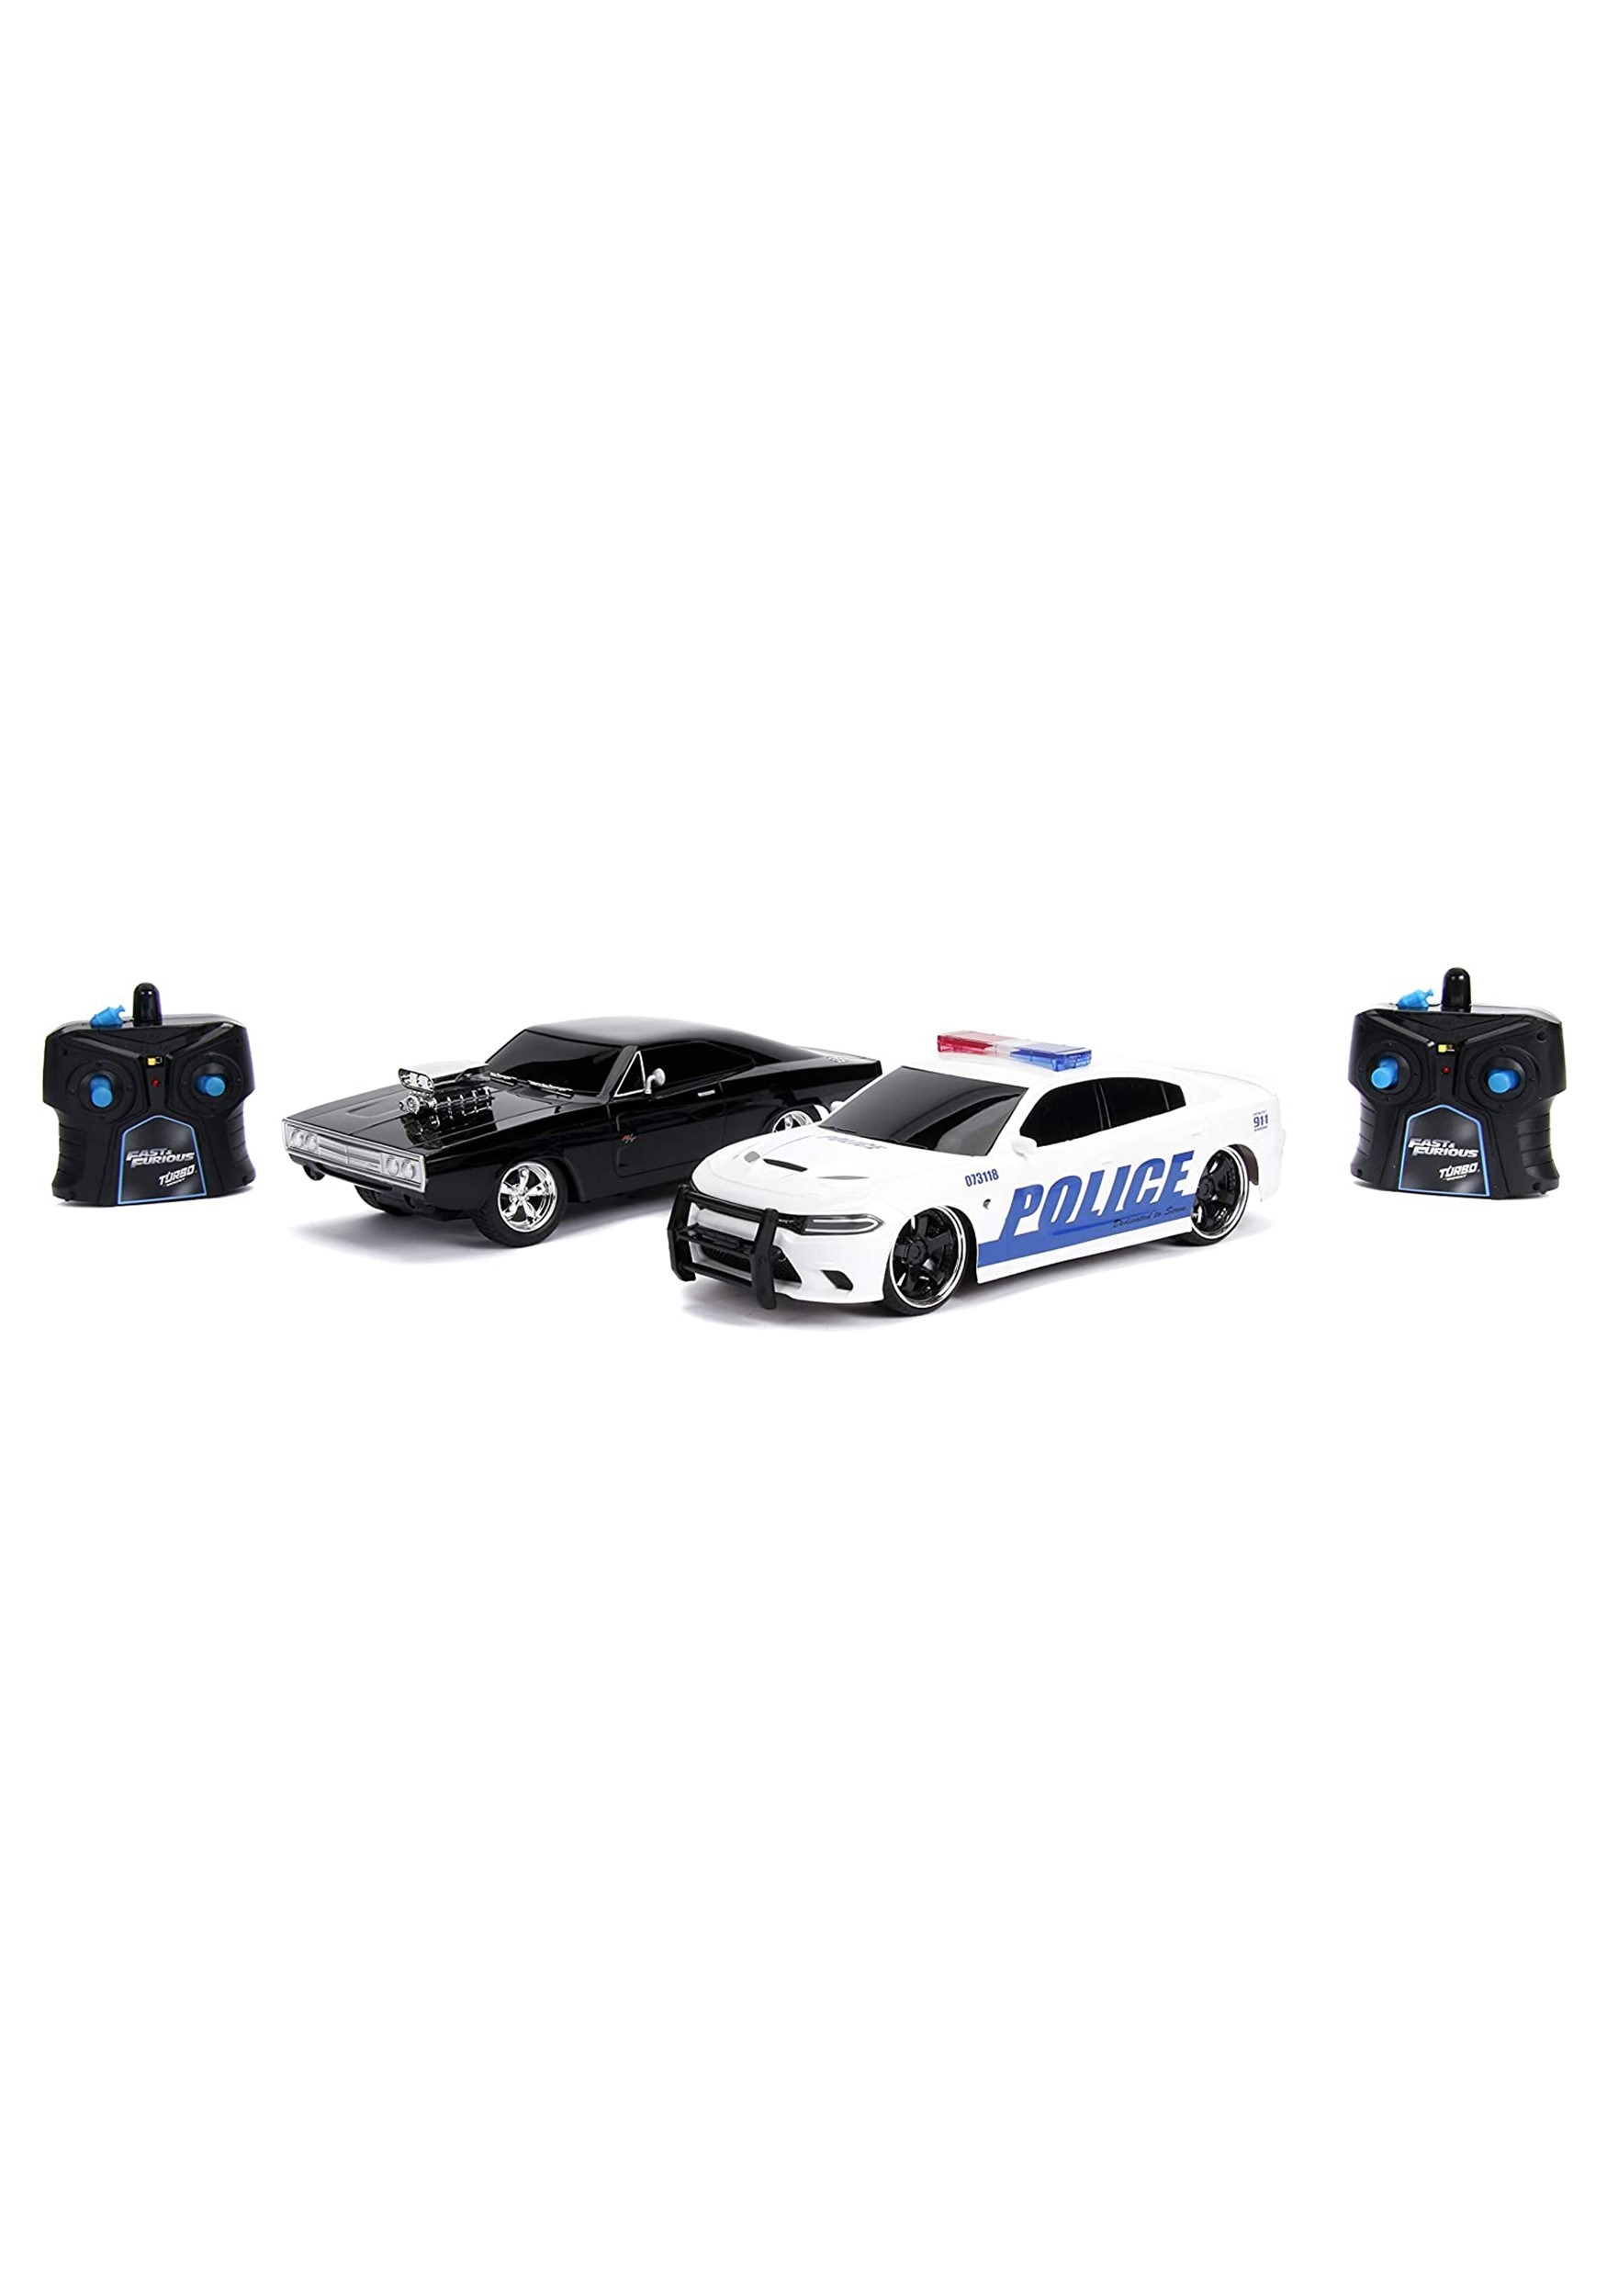 105022FF for sale online Dragon-i Toys Fast & Furious Ultimate Speed Slot Car Racing Track Police Car Dodge 